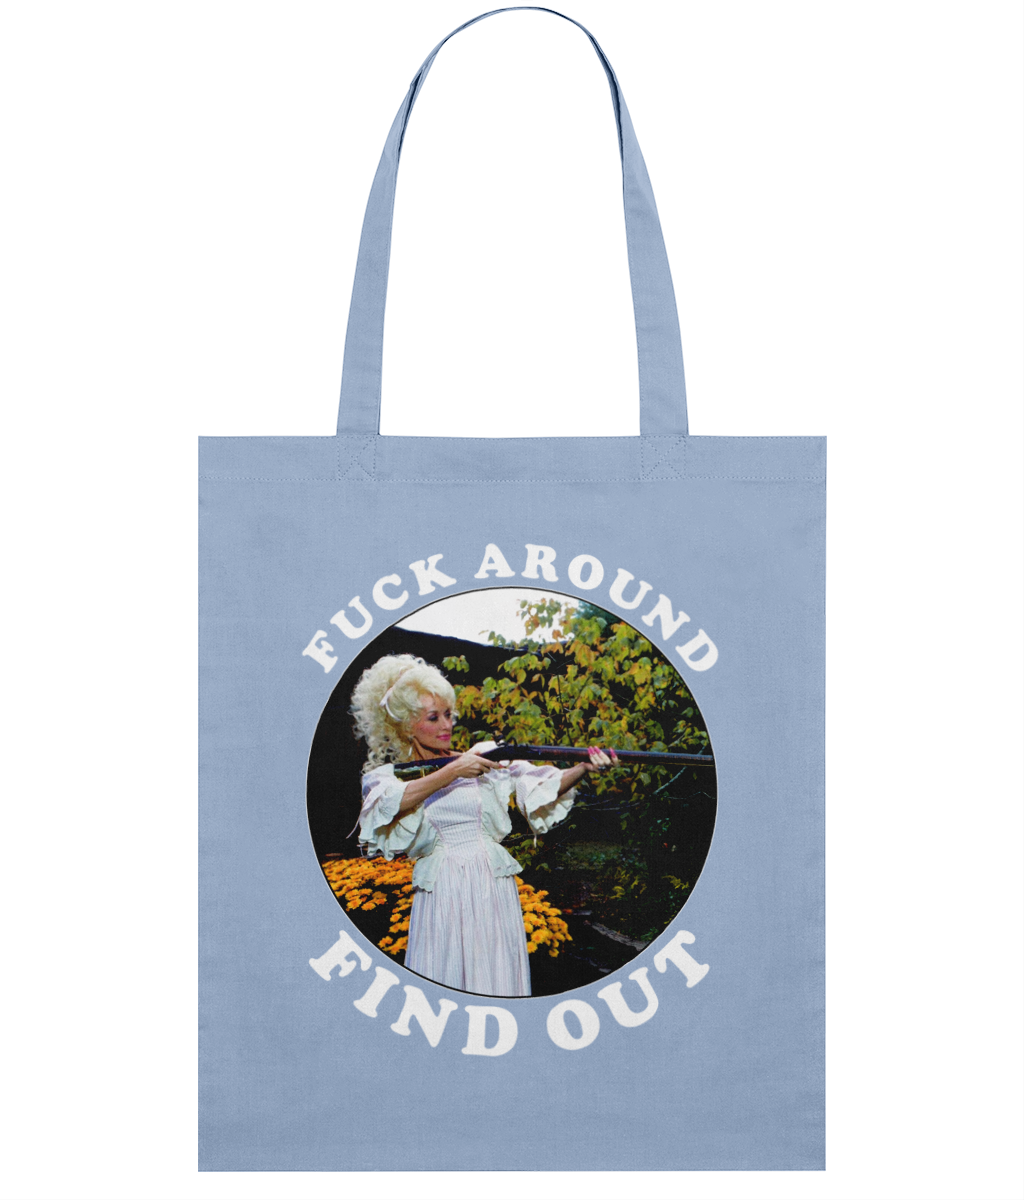 Fuck Around Find Out - White Text - Tote Bag